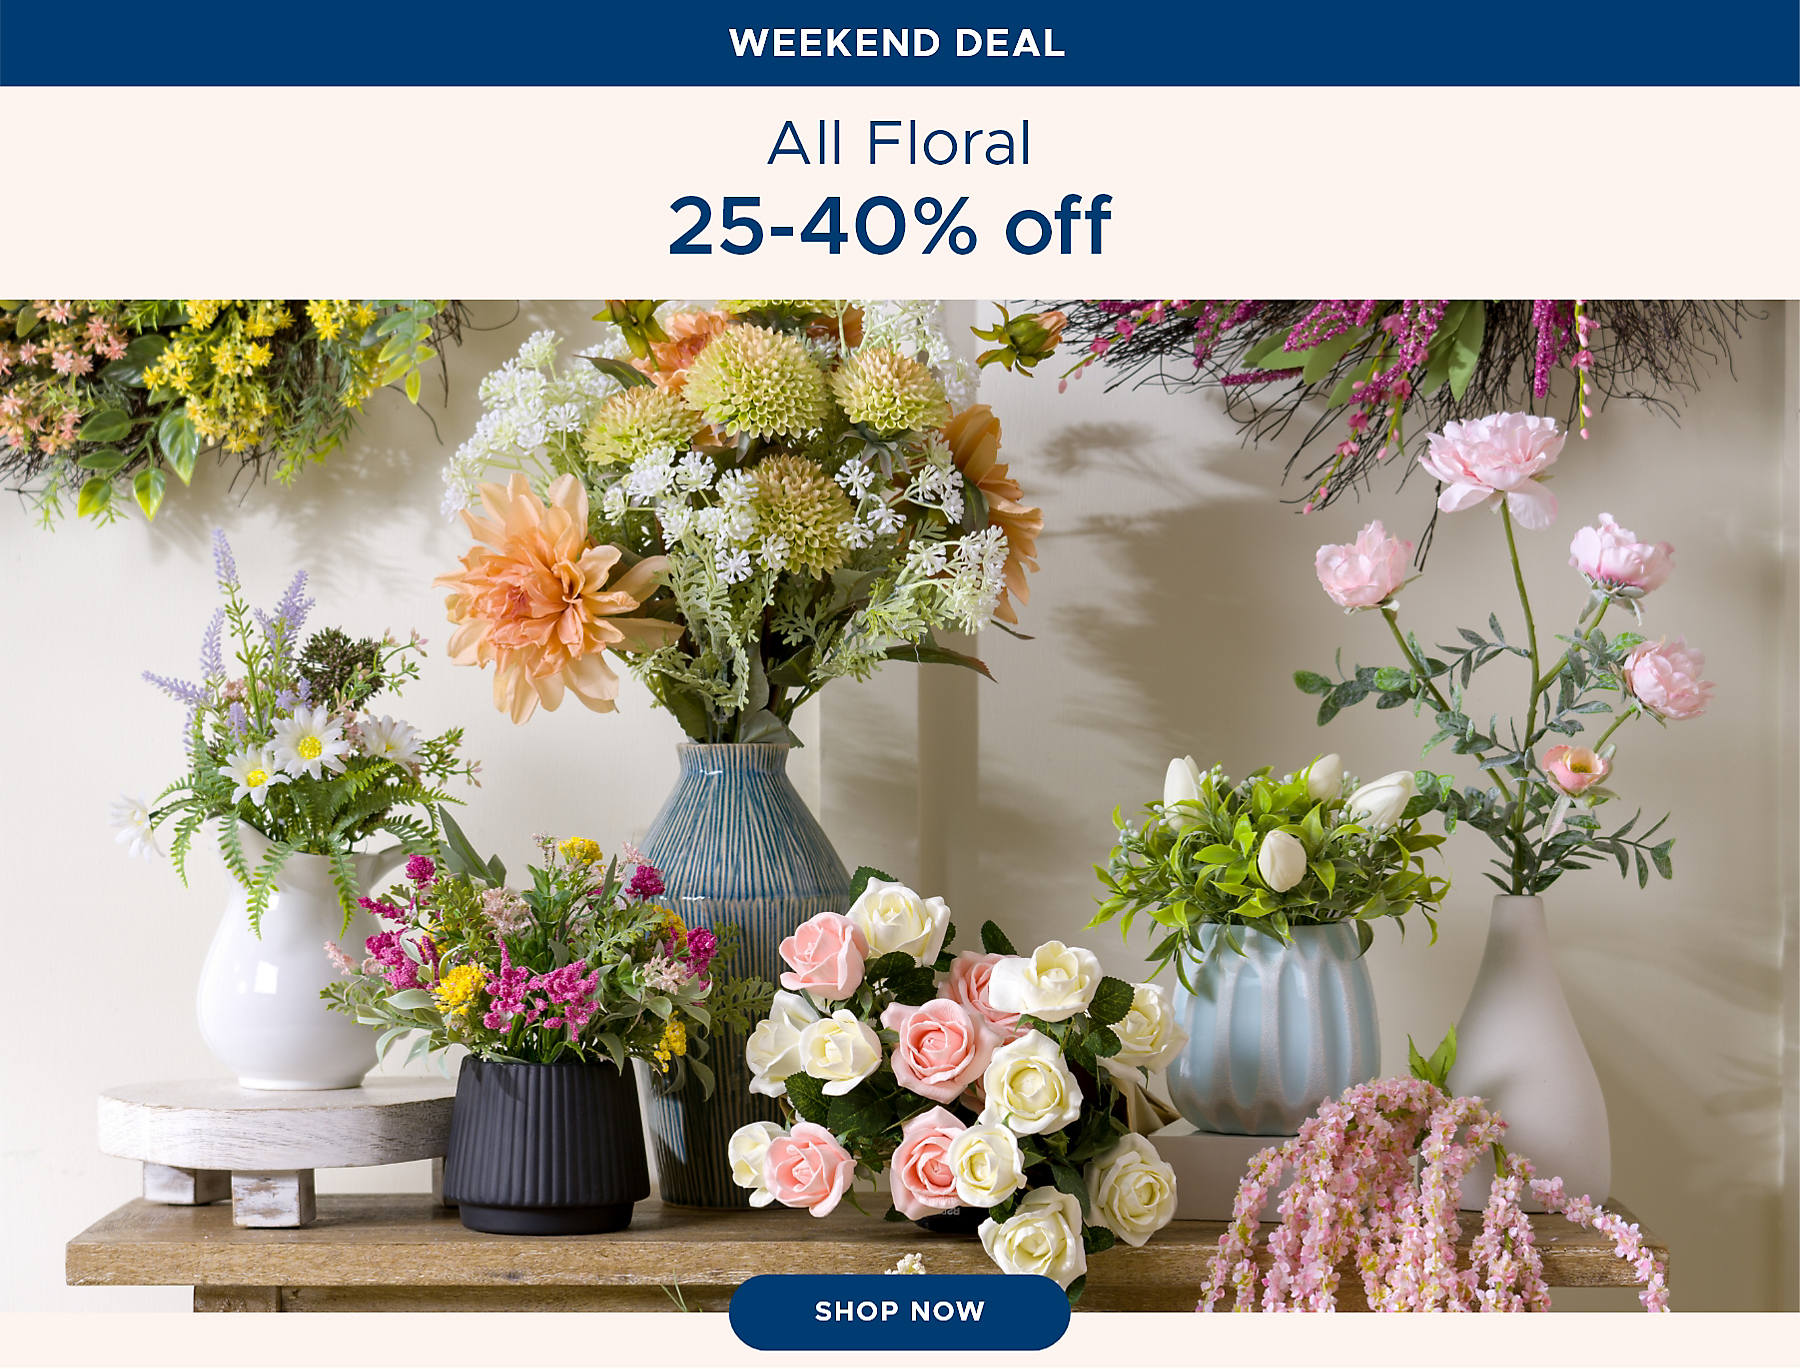 Weekend Deal All Floral 25-40% off shop now